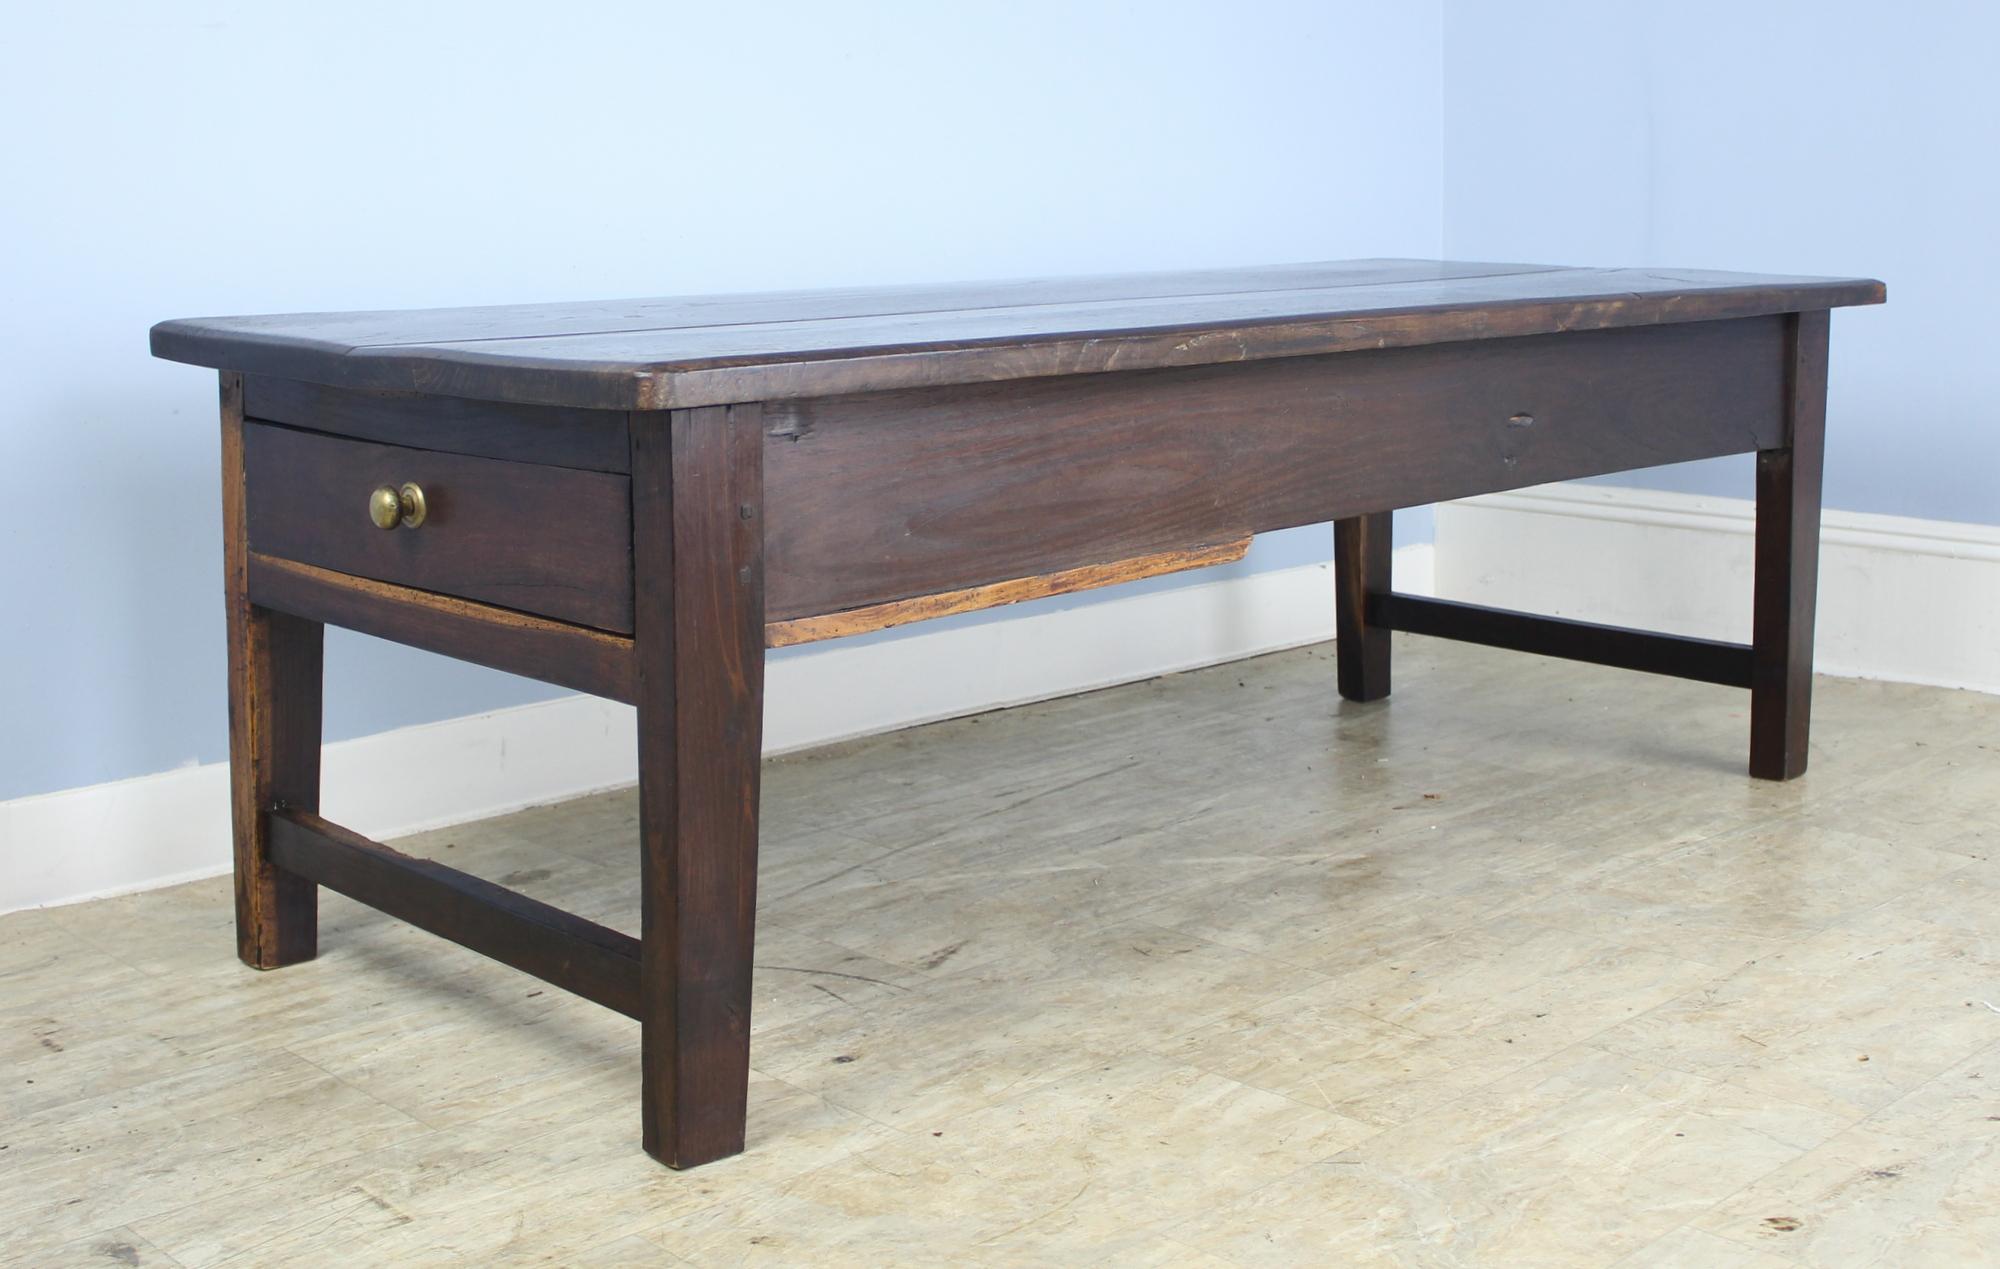 A longer antique coffee table in dark, rich chestnut with yellow stripey grain on the base, mimicking walnut. One deep storage drawer at the end. Interesting shaped apron and cleated top. A Classic!